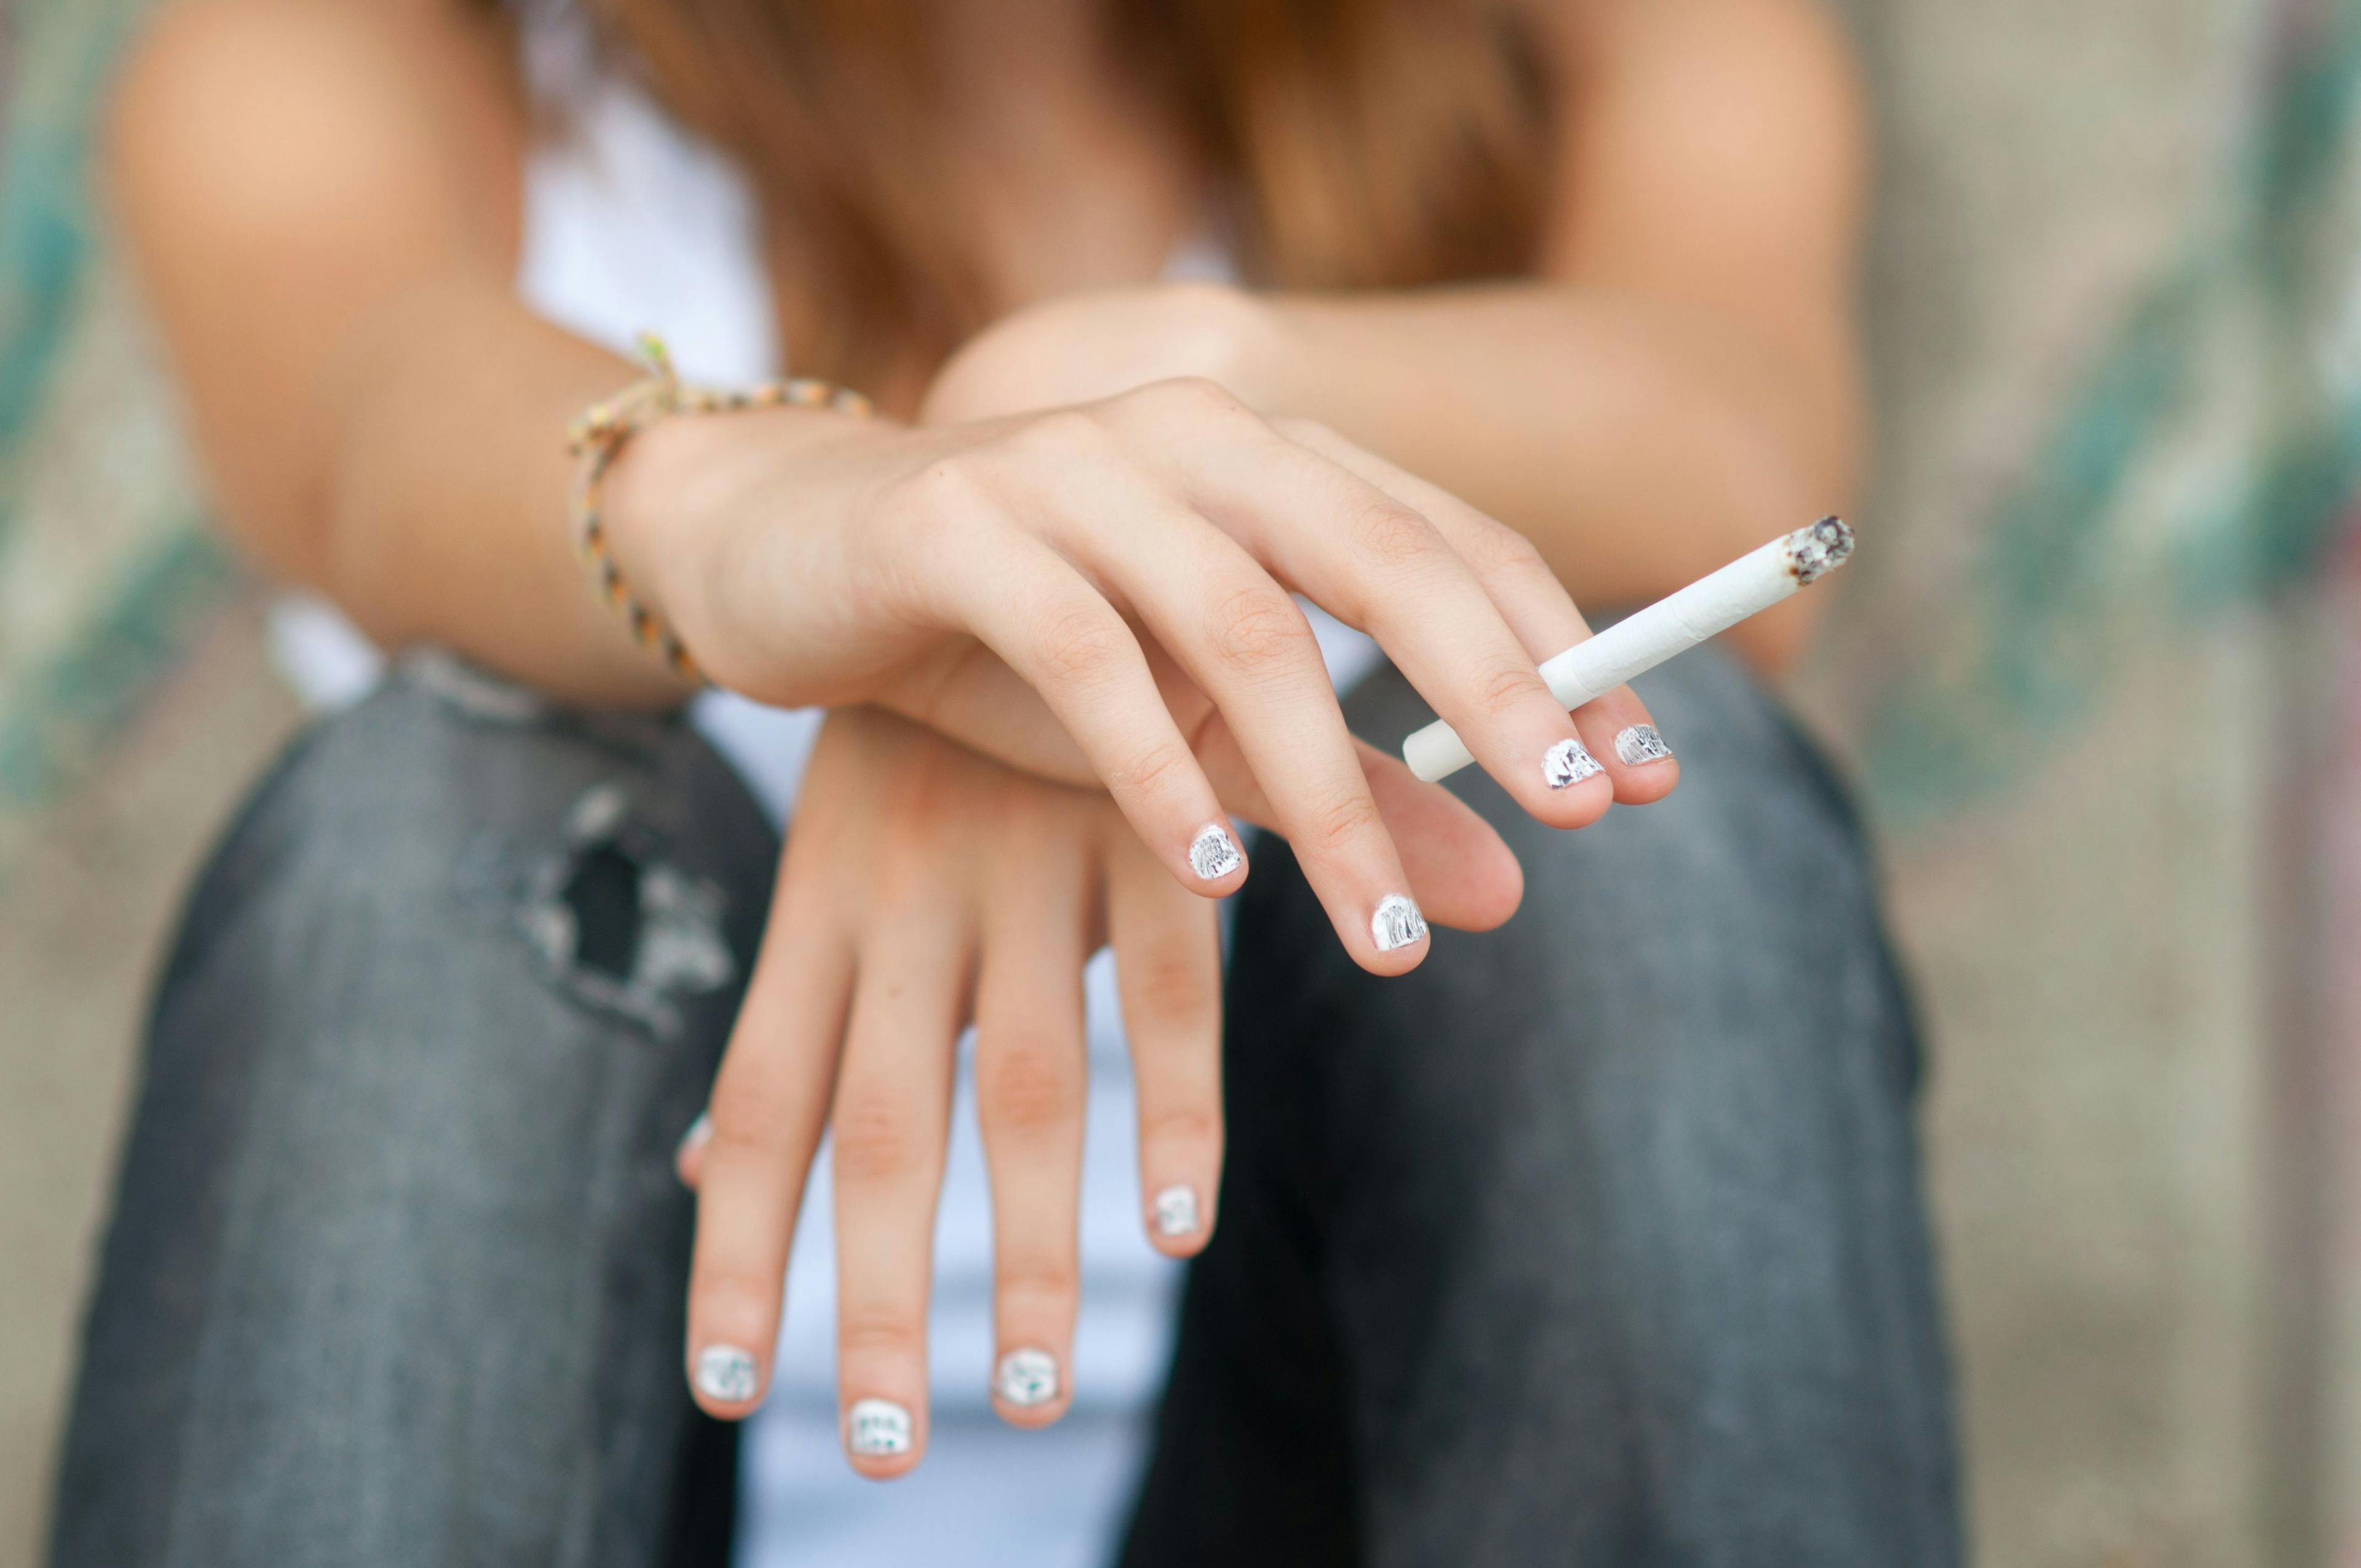 Continued Smoking from Young Age Increases Risk for Premature Death